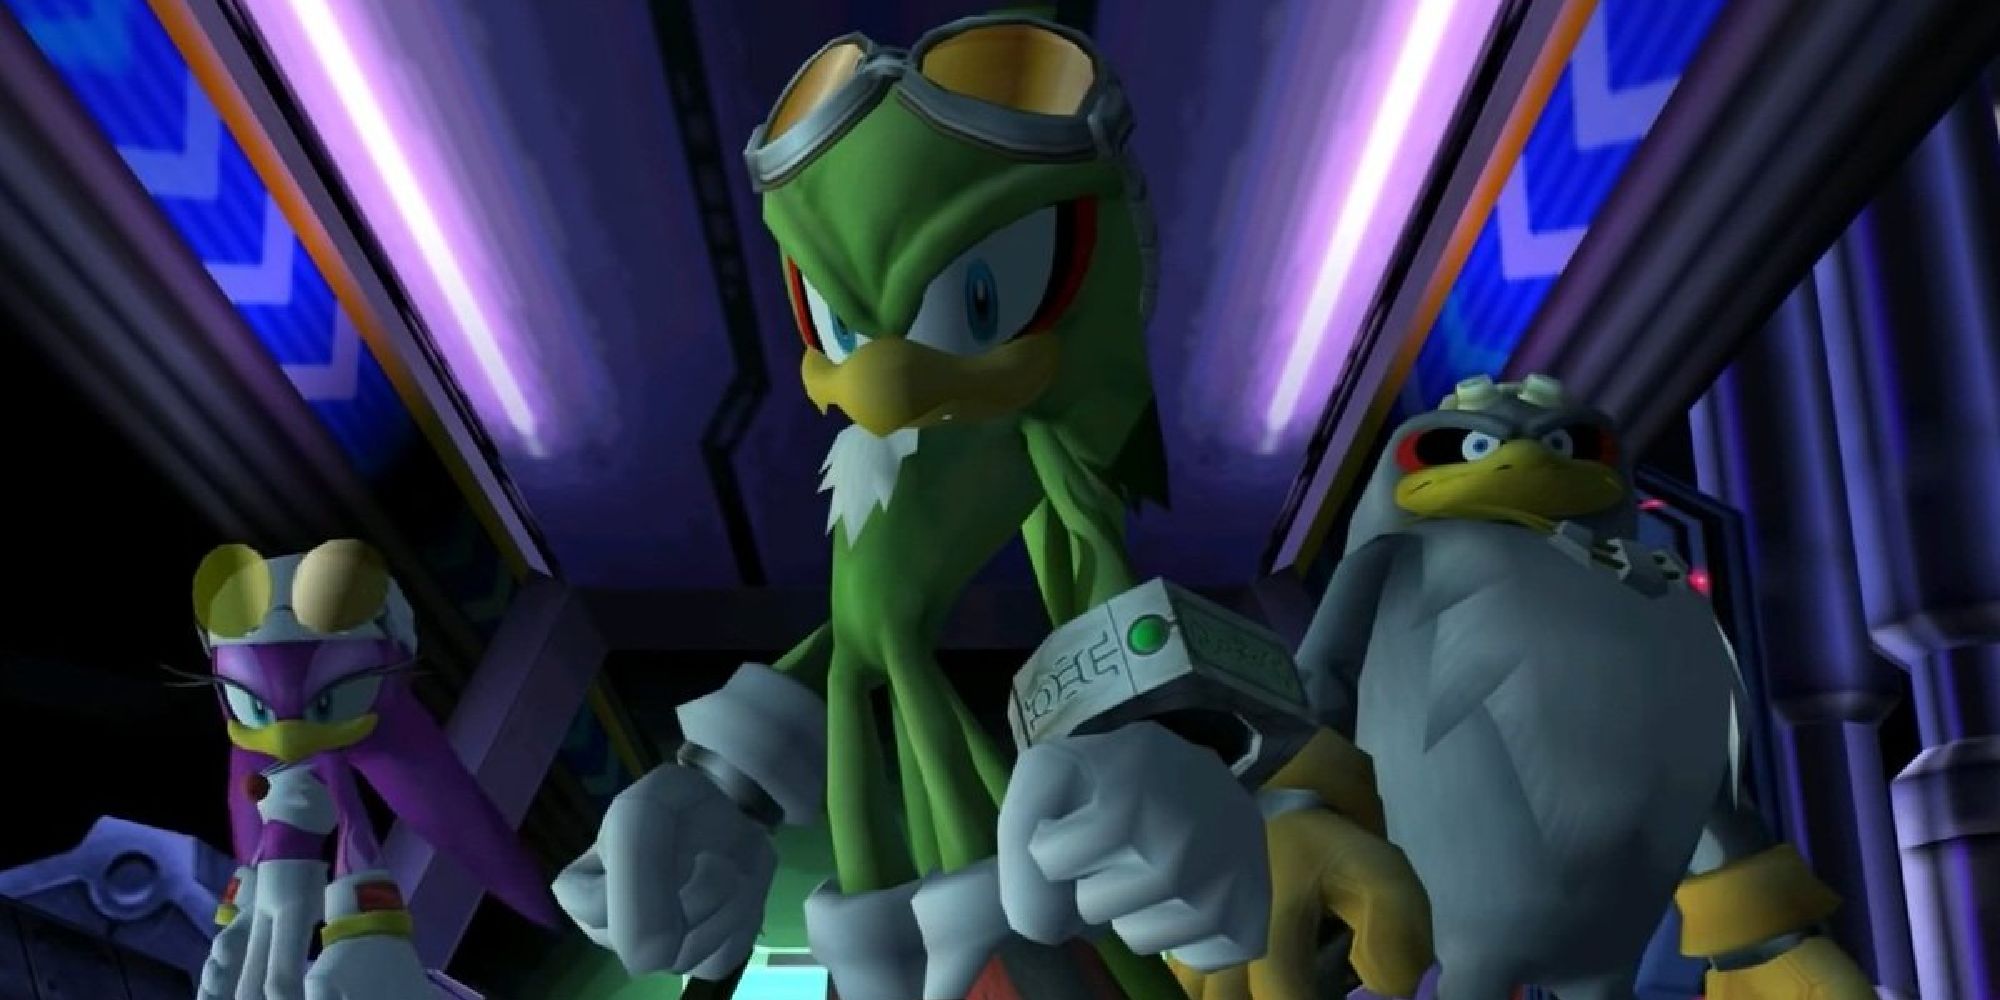 Jet, Storm, and Wave standing in V-formation in Sonic Riders